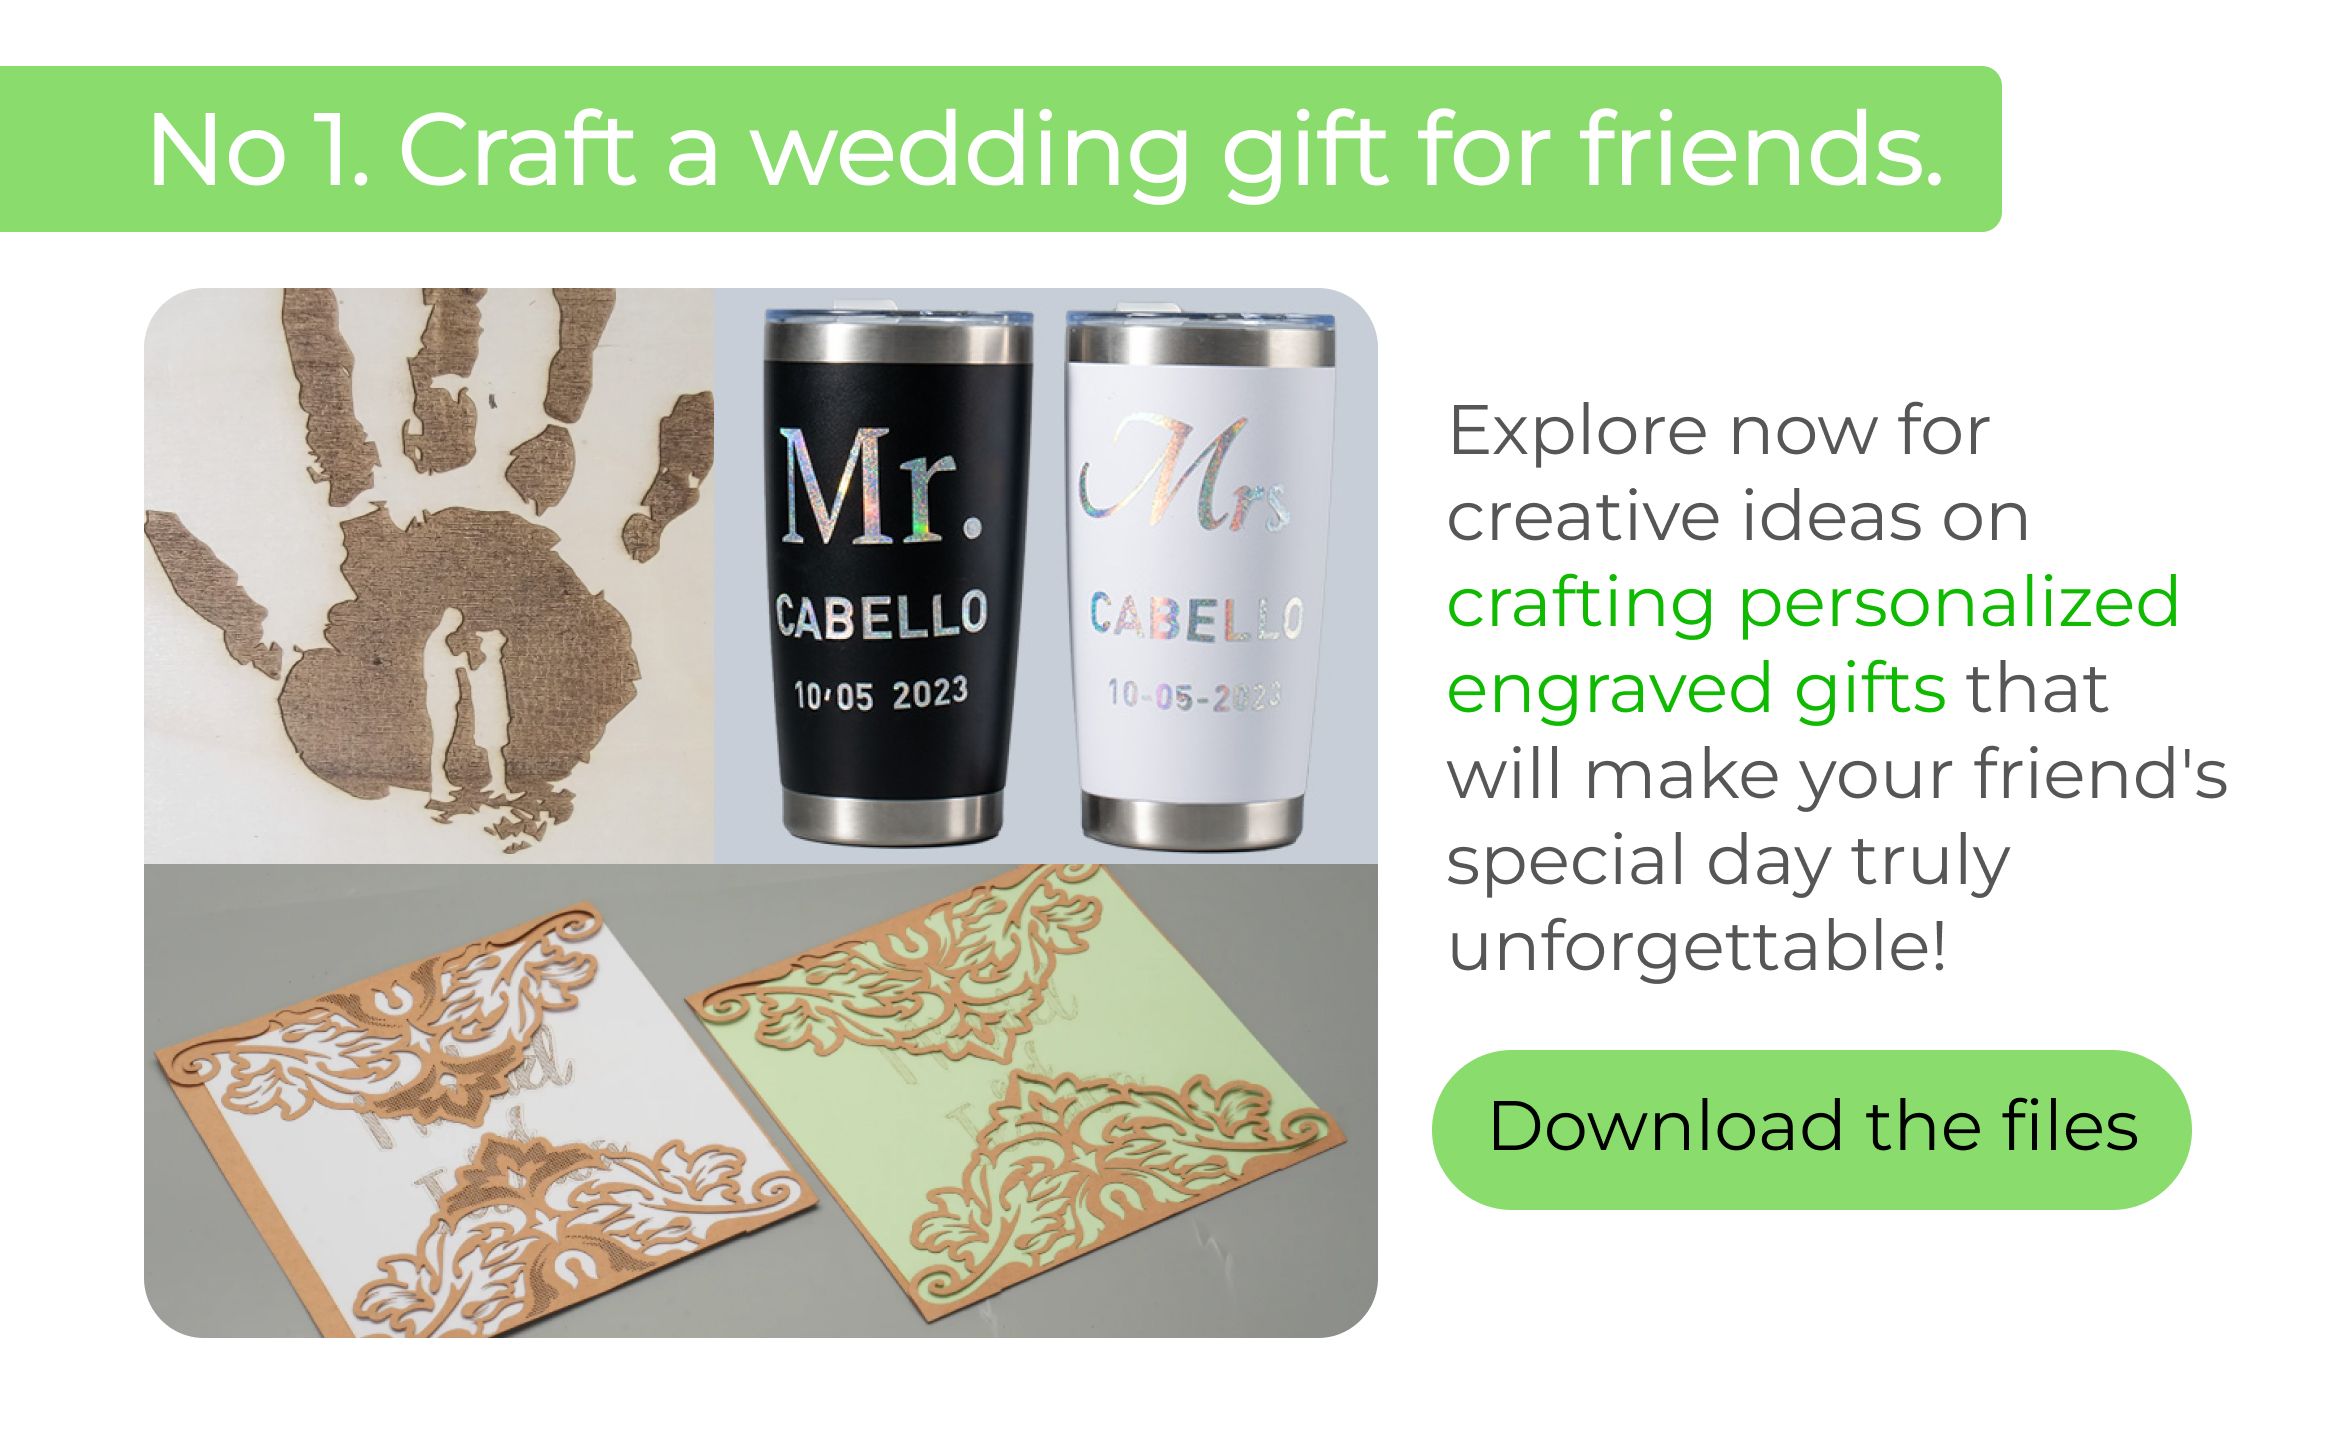 Craft a wedding gift for friends.